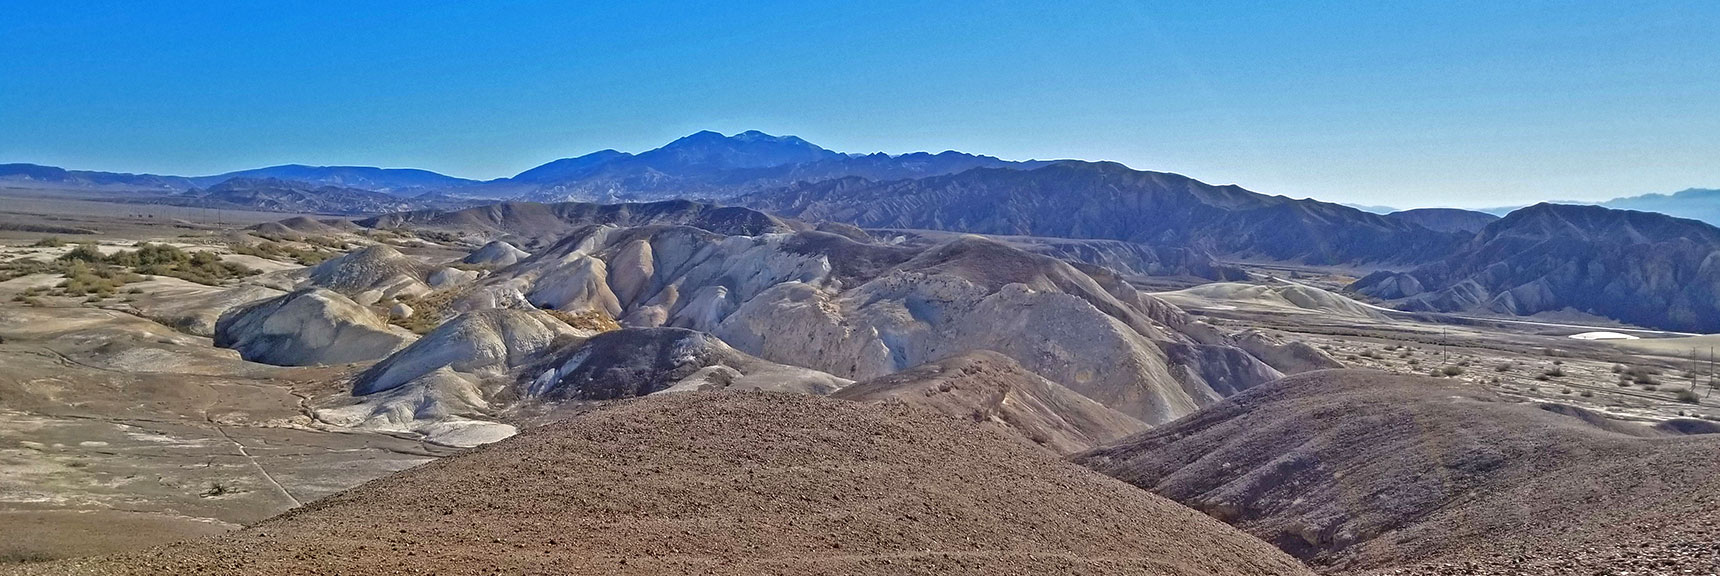 Black Mountains and Mt. Perry to North from Table Rock Summit. | Tea House & Table Rock Circuit | Furnace Creek | Death Valley National Park, California